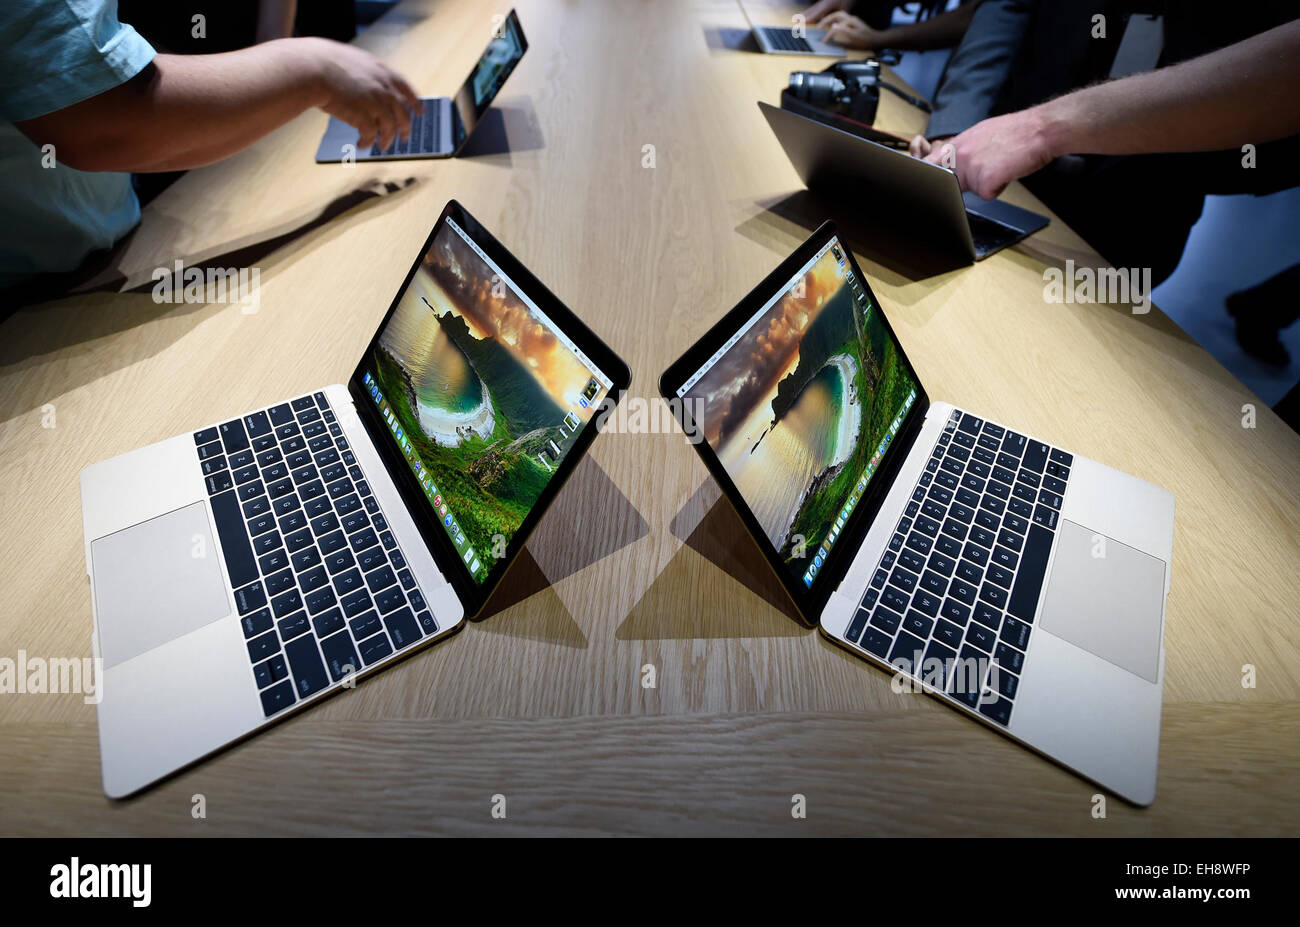 Orlando, FL/USA-12/6/19: An Apple store with people waiting to purchase  Apple Macbooks, iPads and iPhones Stock Photo - Alamy